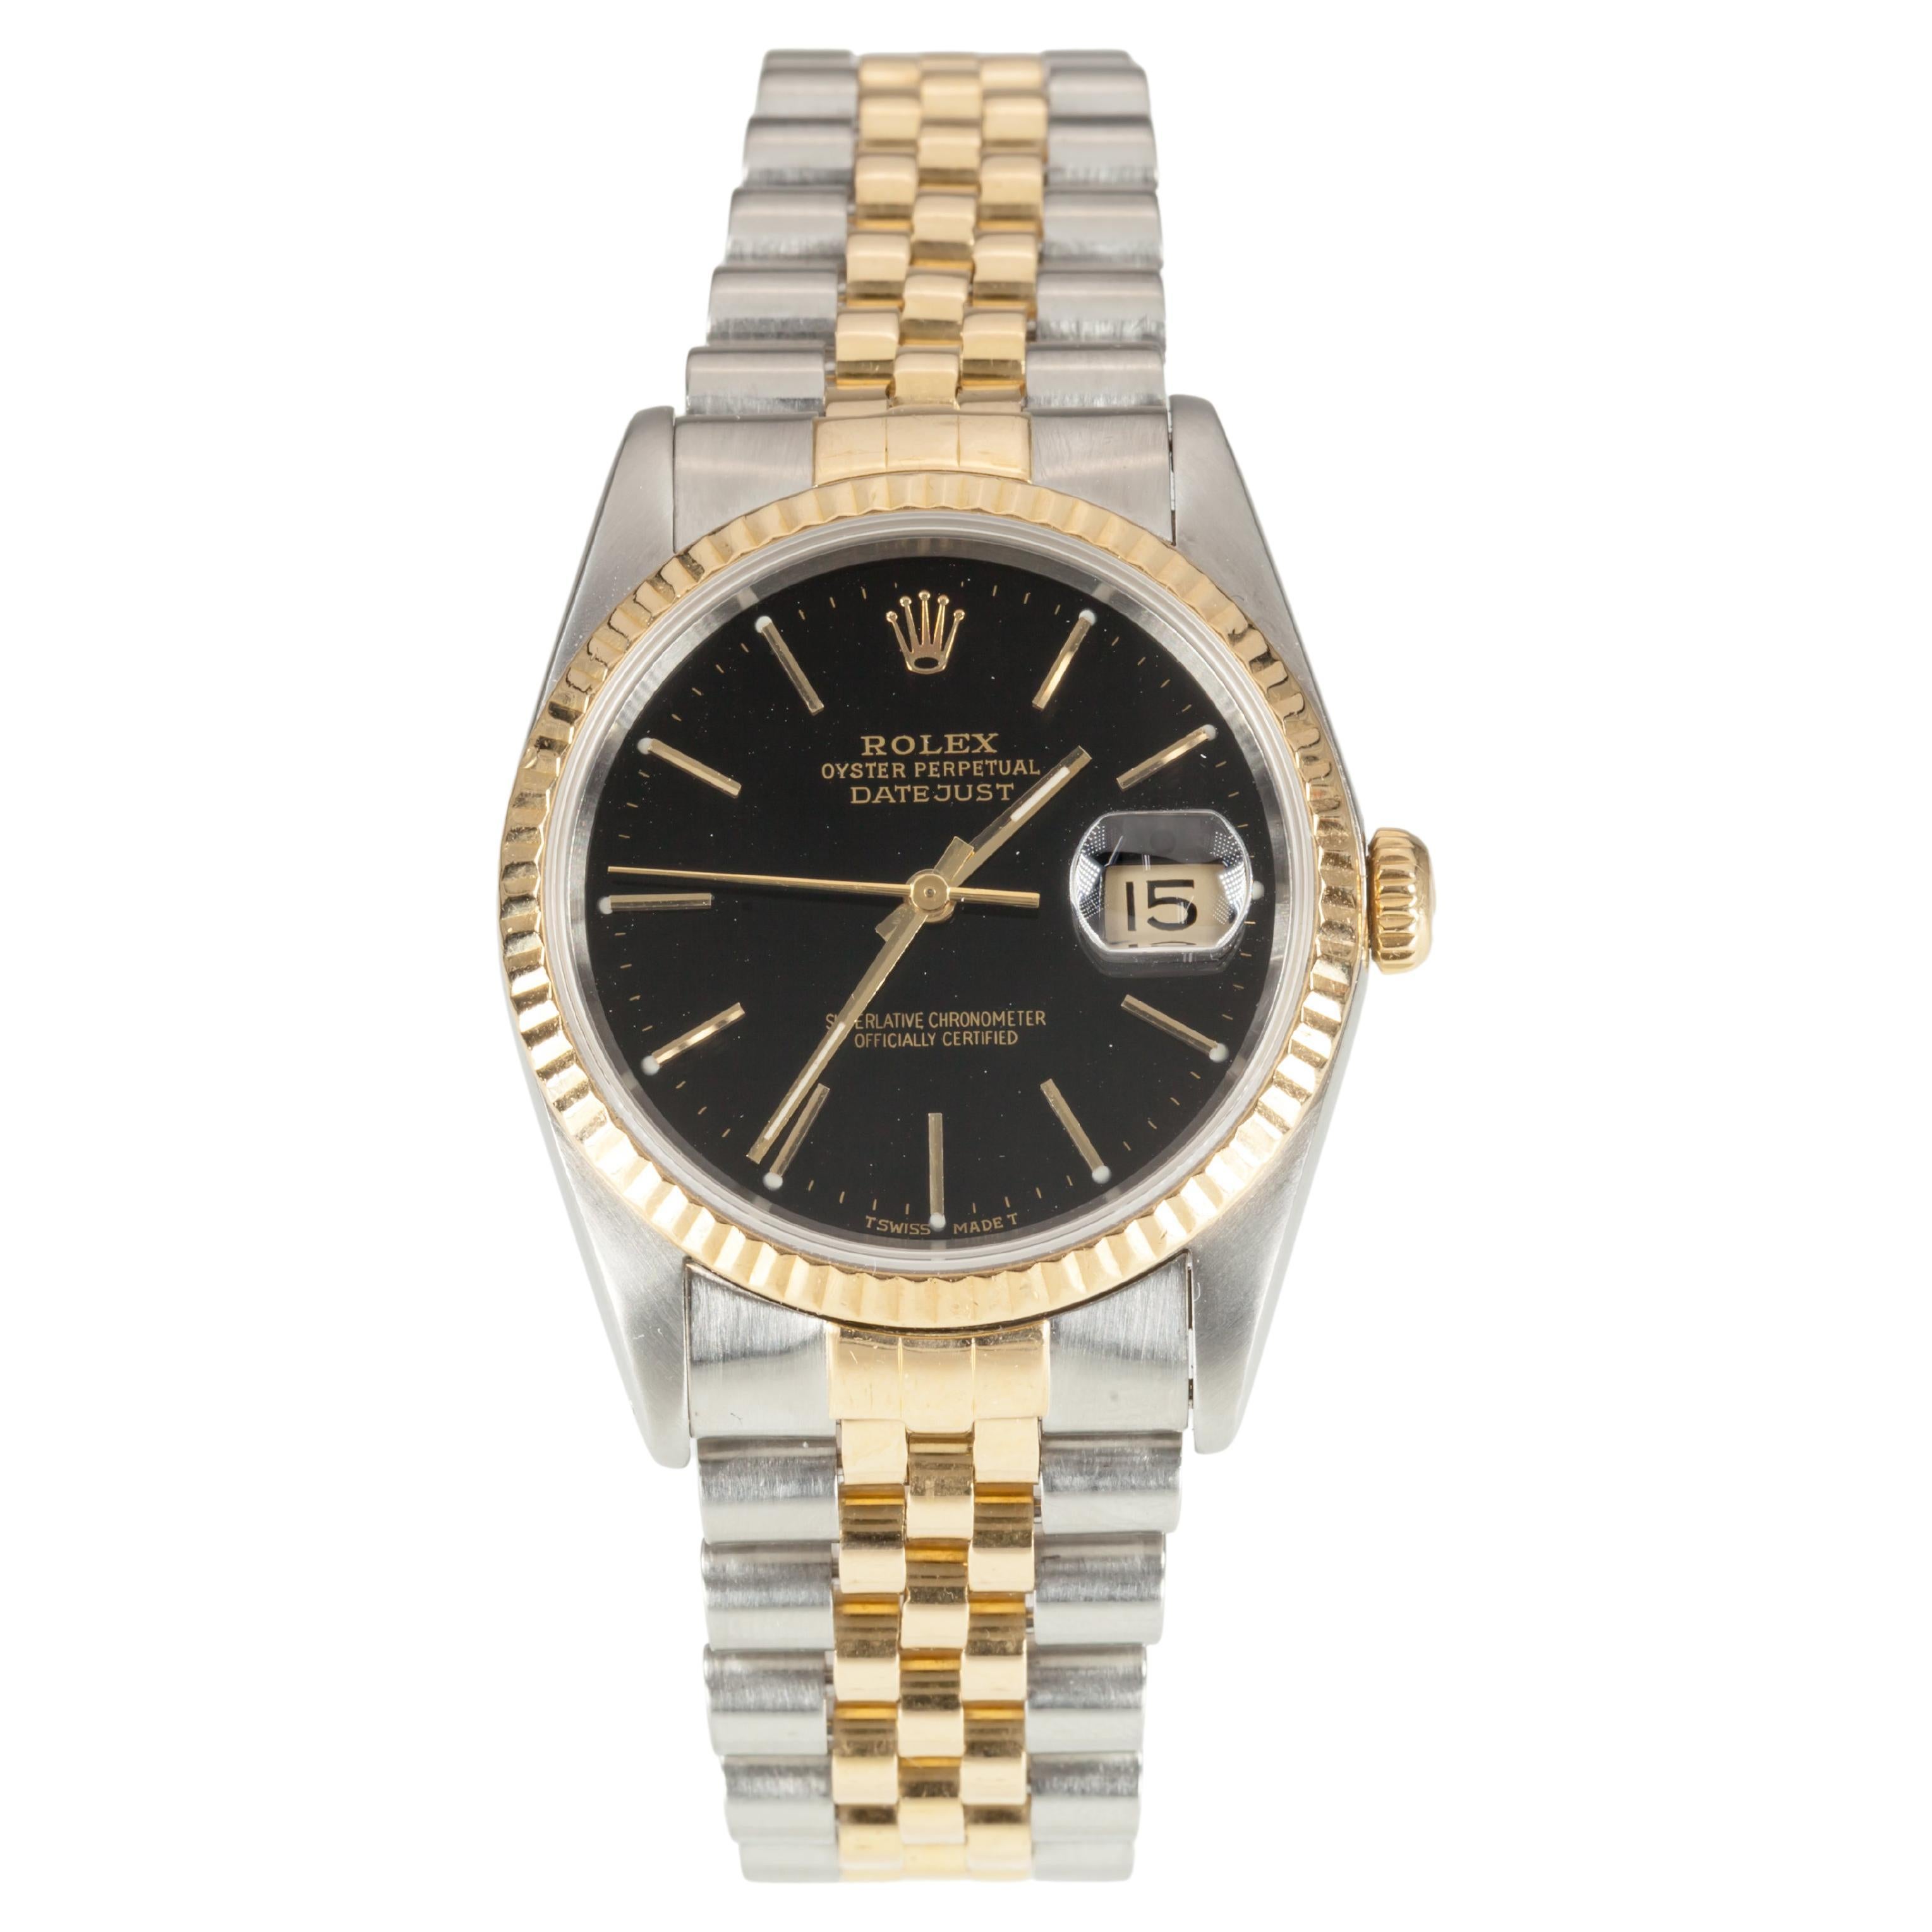 Rolex Men's Two-Tone OPDJ 16233 Stainless and 18k Yellow Gold Automatic Watch